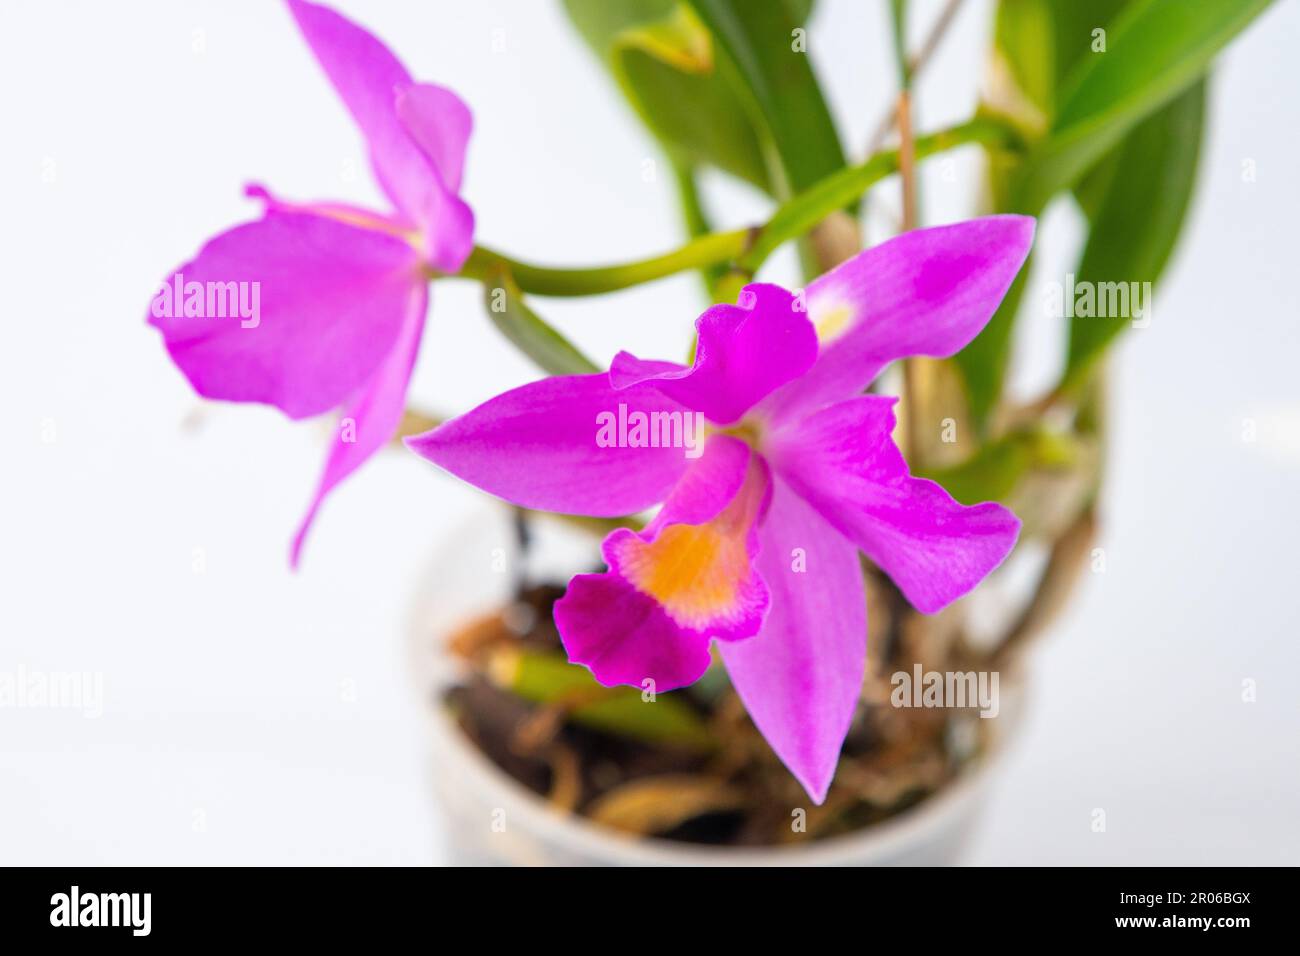 Orchid Cattleya home flower. Large pink purple buds. Flowering of a rare variety of orchids labiata. White background. Flowers pot garden cattleya orchidaceae family. Stock Photo